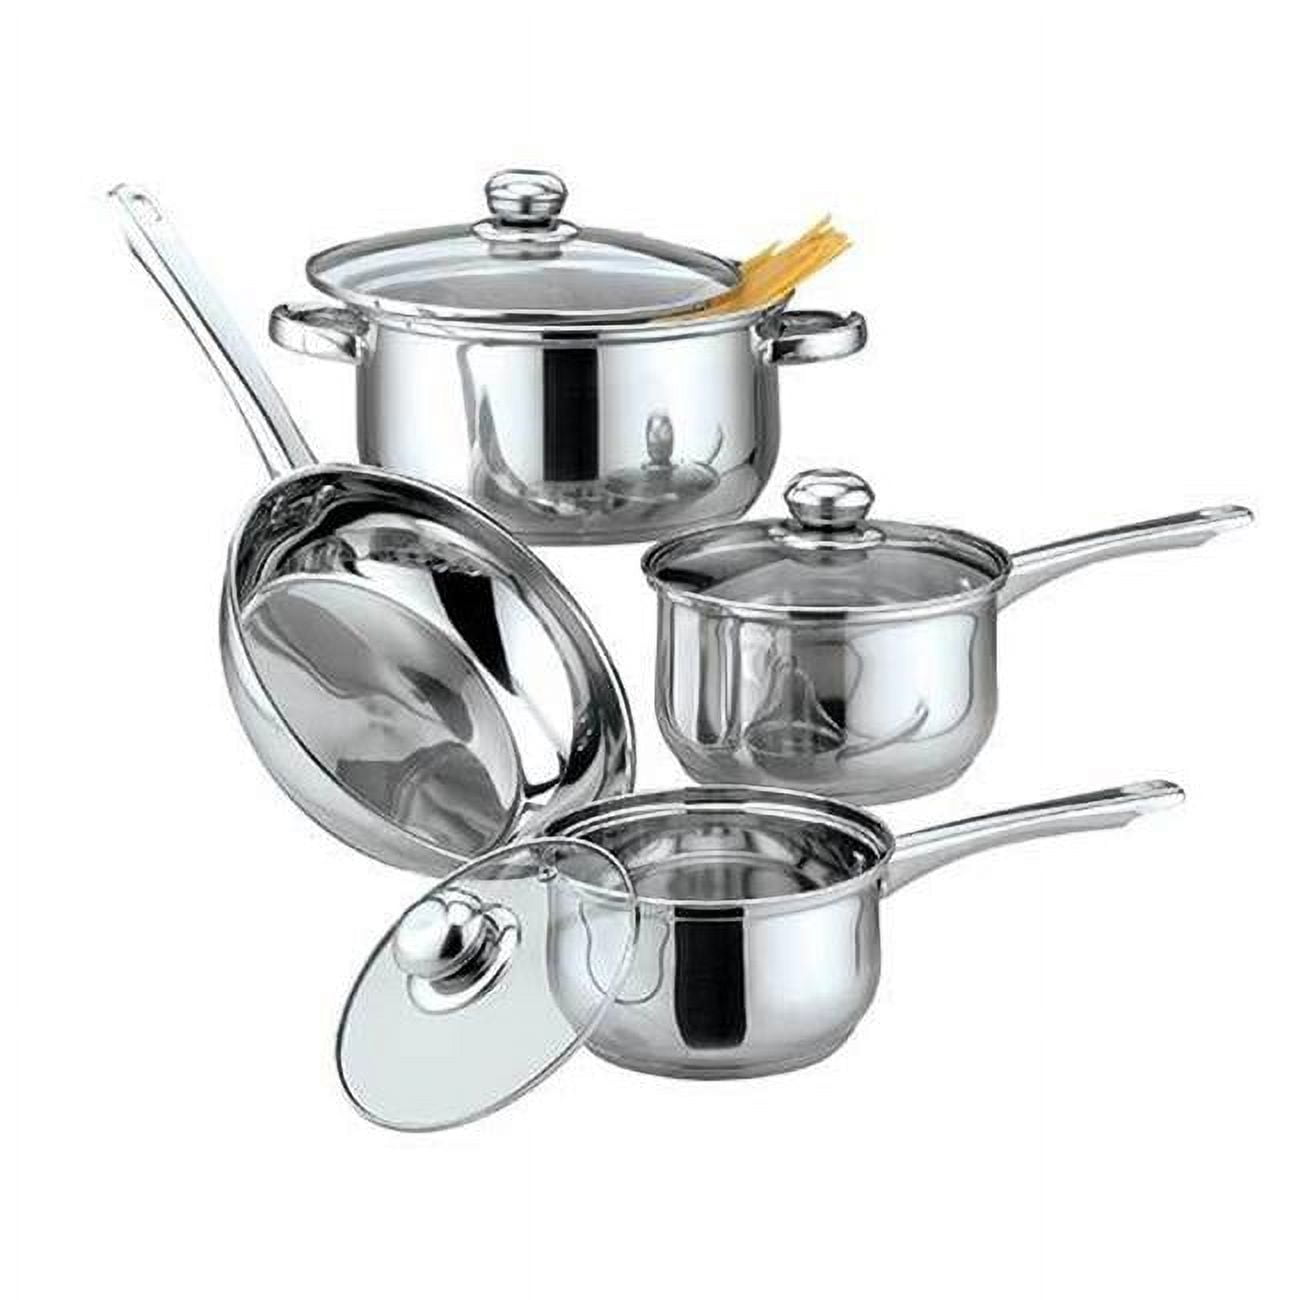 Picture of Culinary Edge 2177 Classic Stainless Steel Cookware Set, Silver - 7 Piece